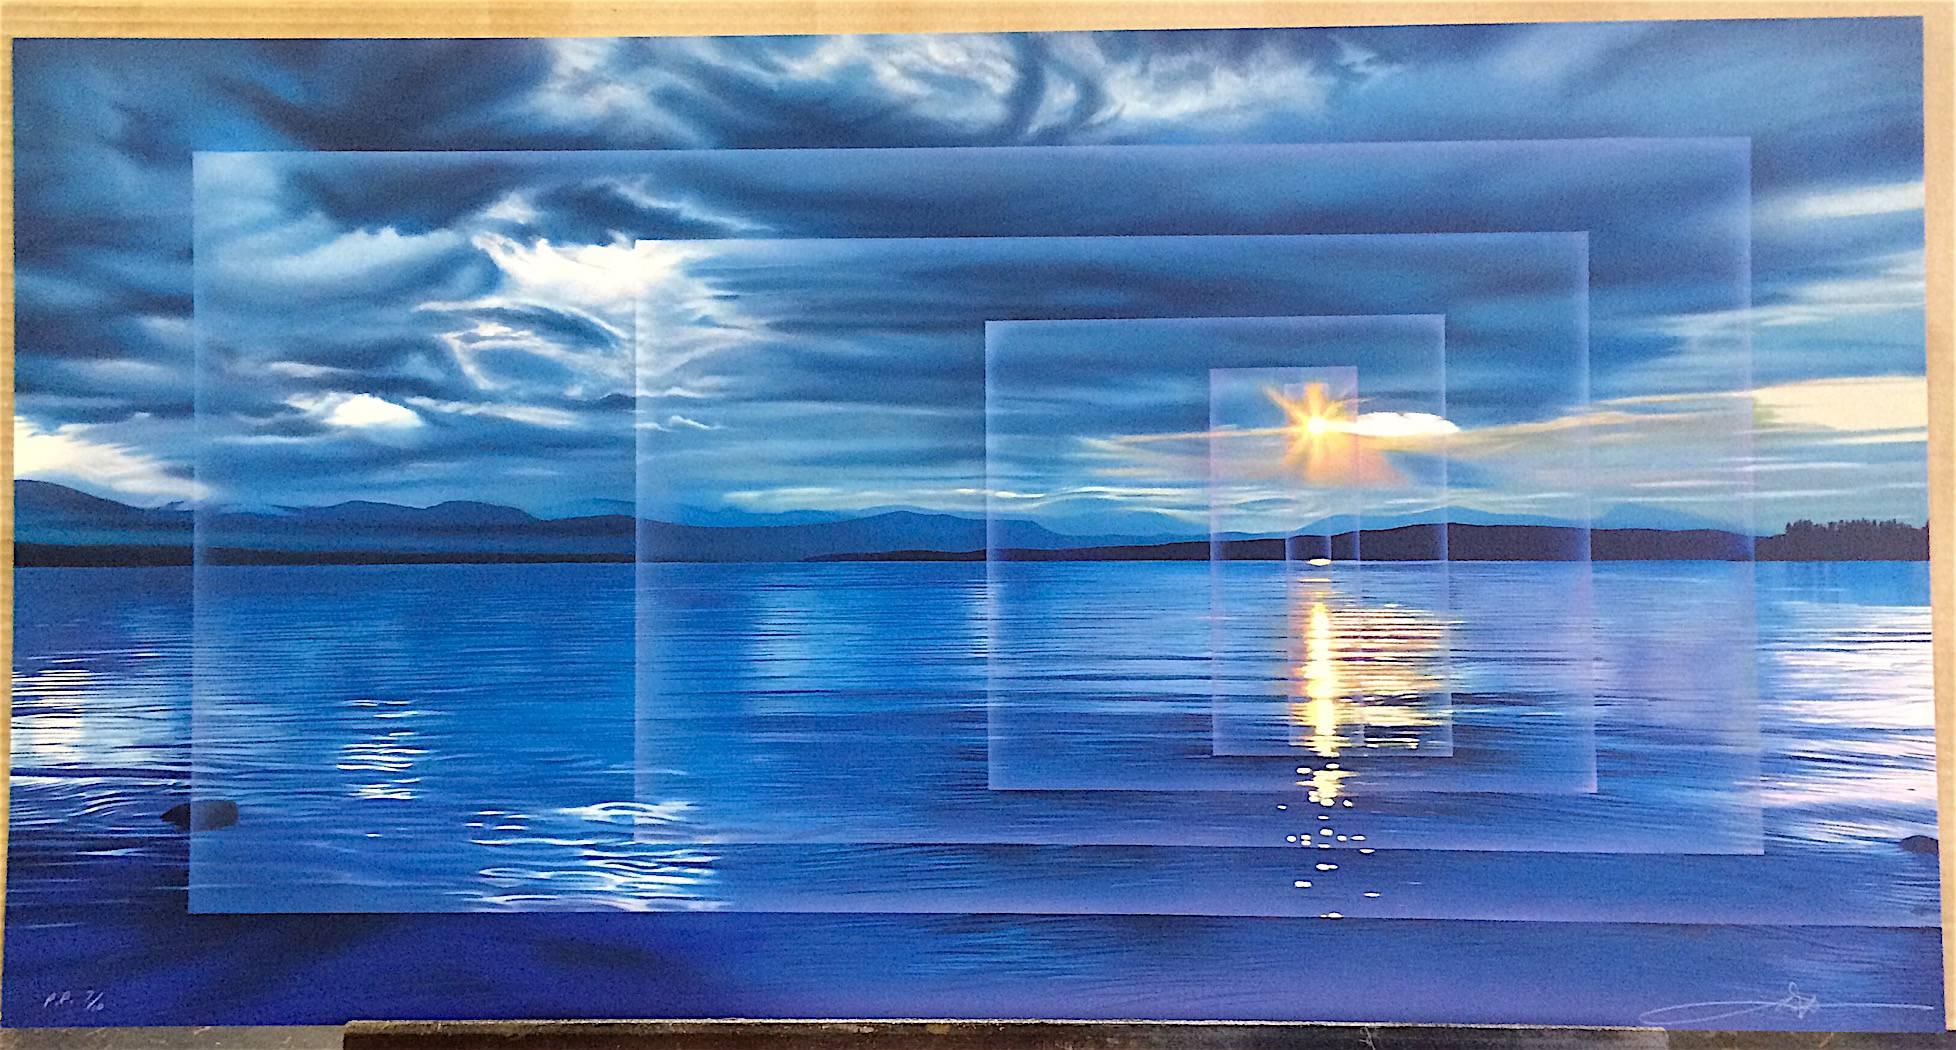 CALM Signed Lithograph, Blue Water Landscape, Sunset, Yellow Sun, Clouds - Print by Frank Licsko